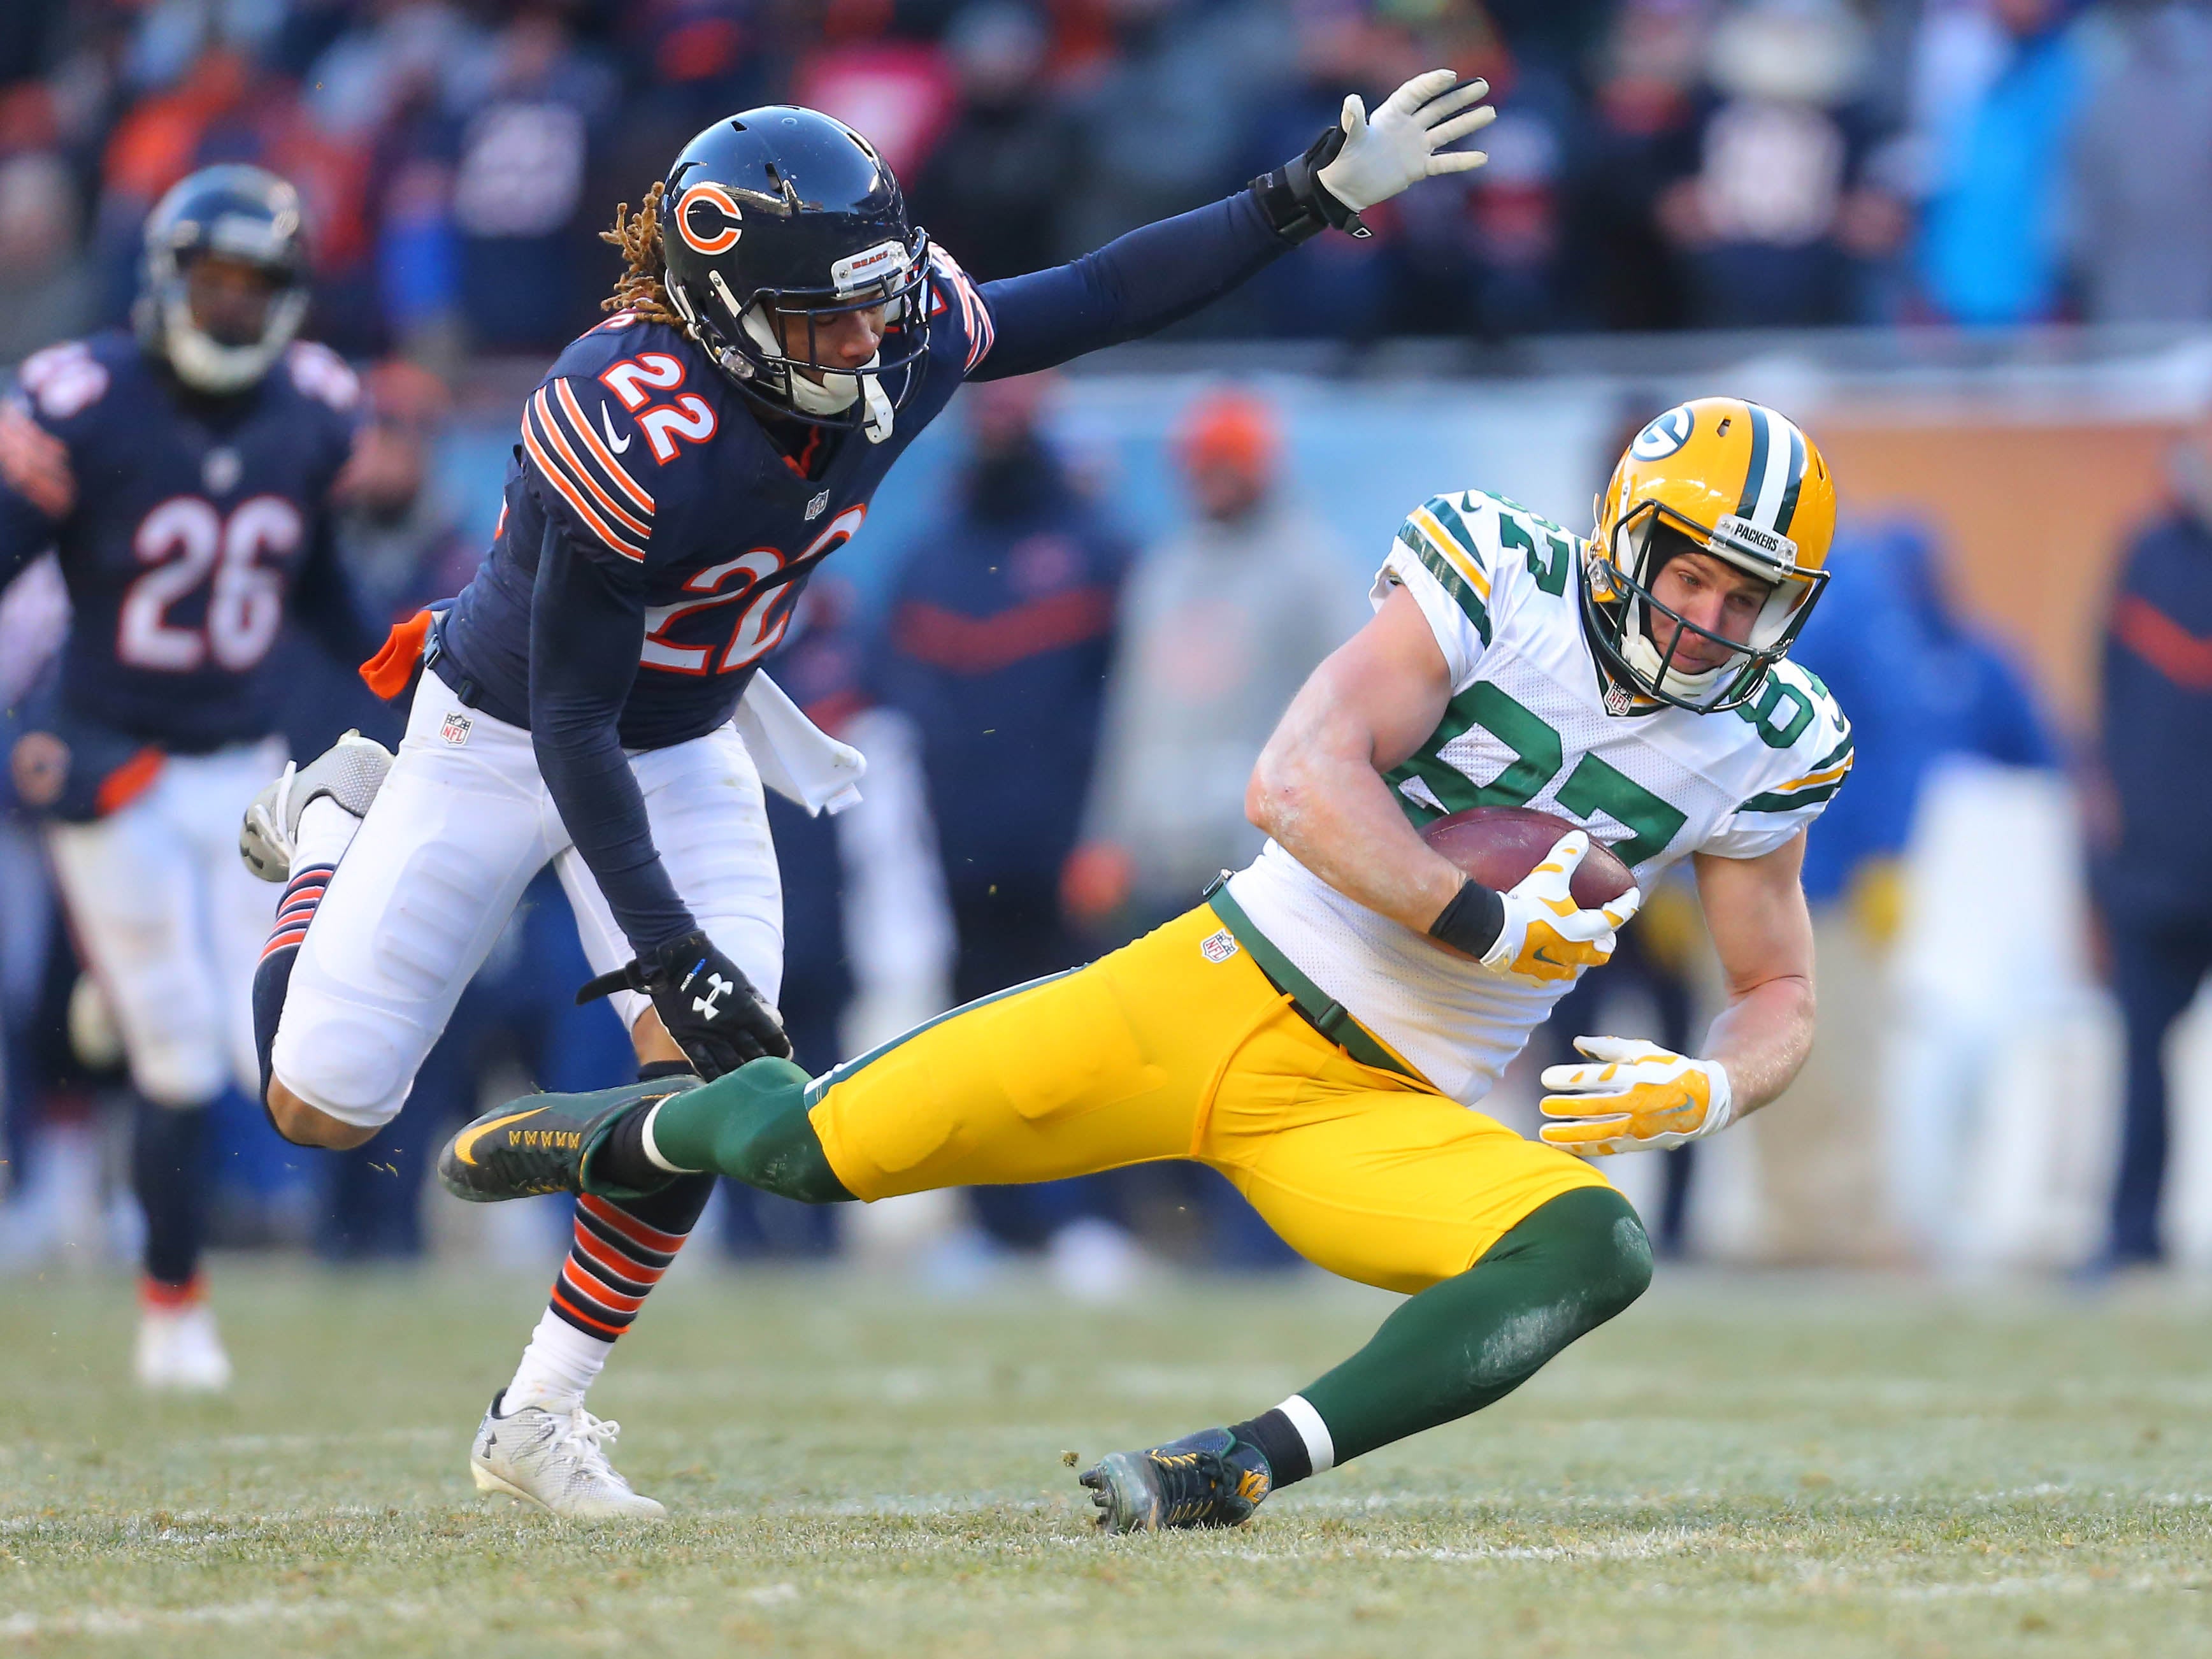 Packers vs. Bears Thanksgiving Game Draws Nearly 28 Million